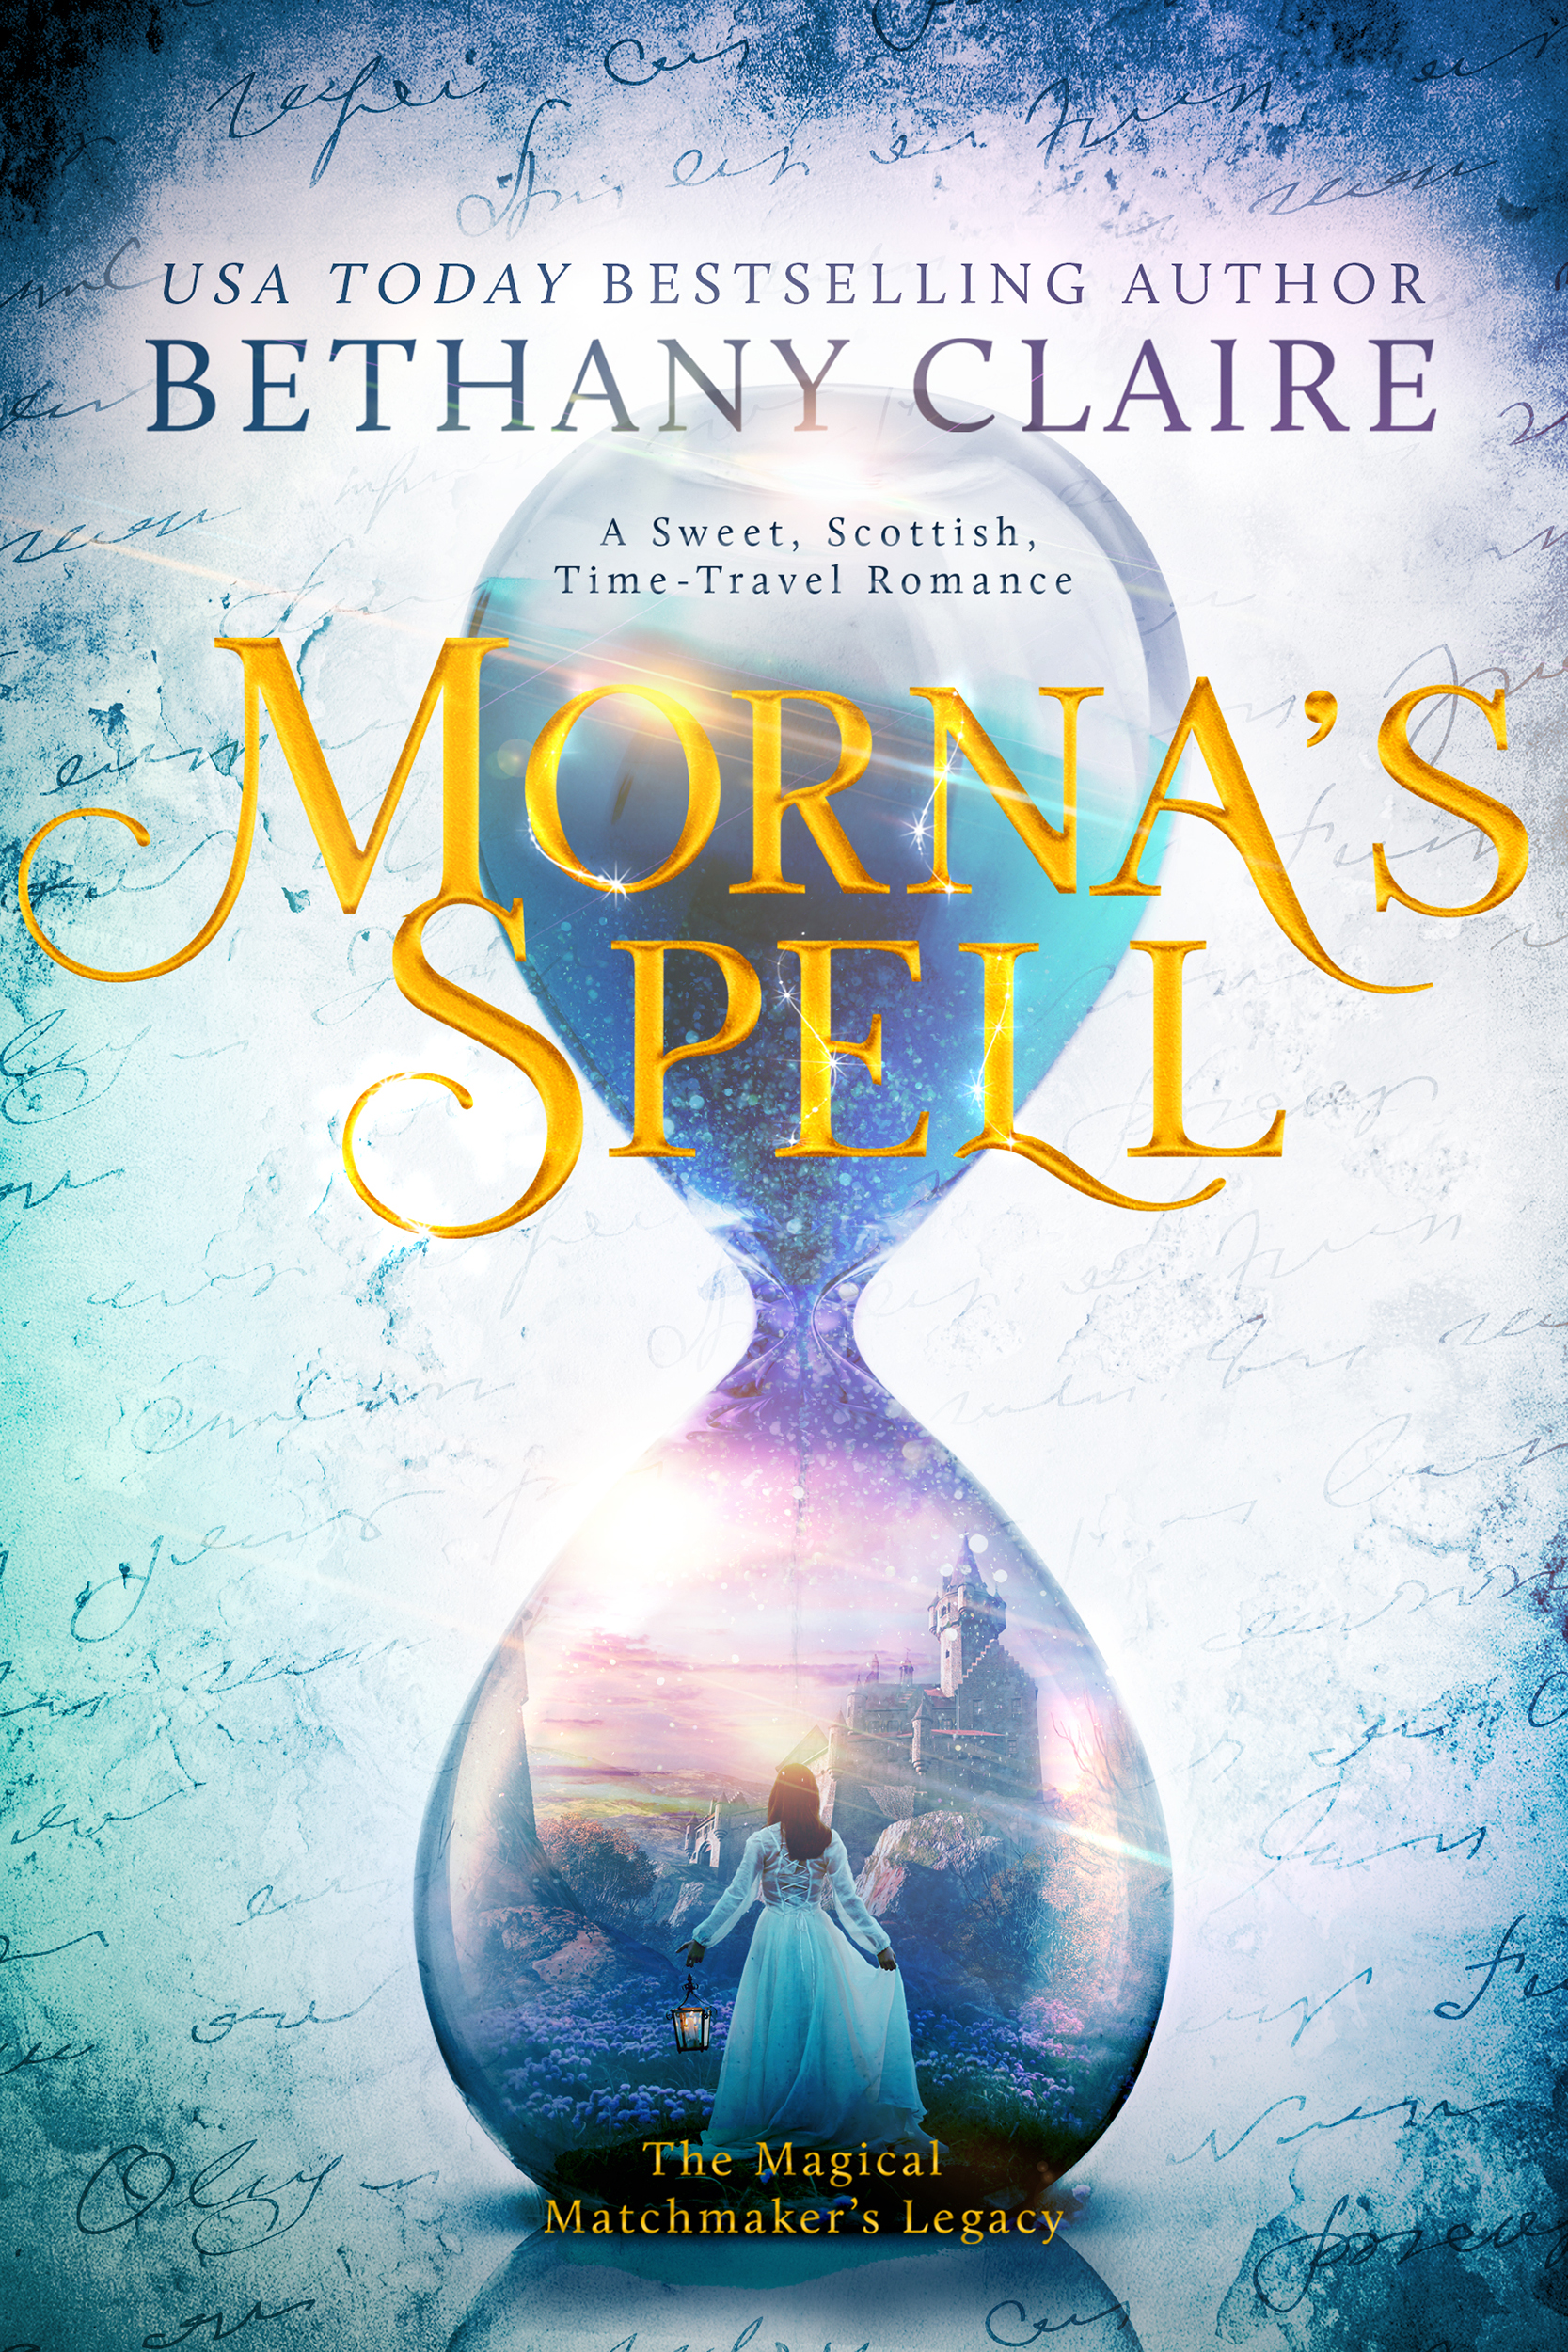 Morna's Spell by Bethany Claire